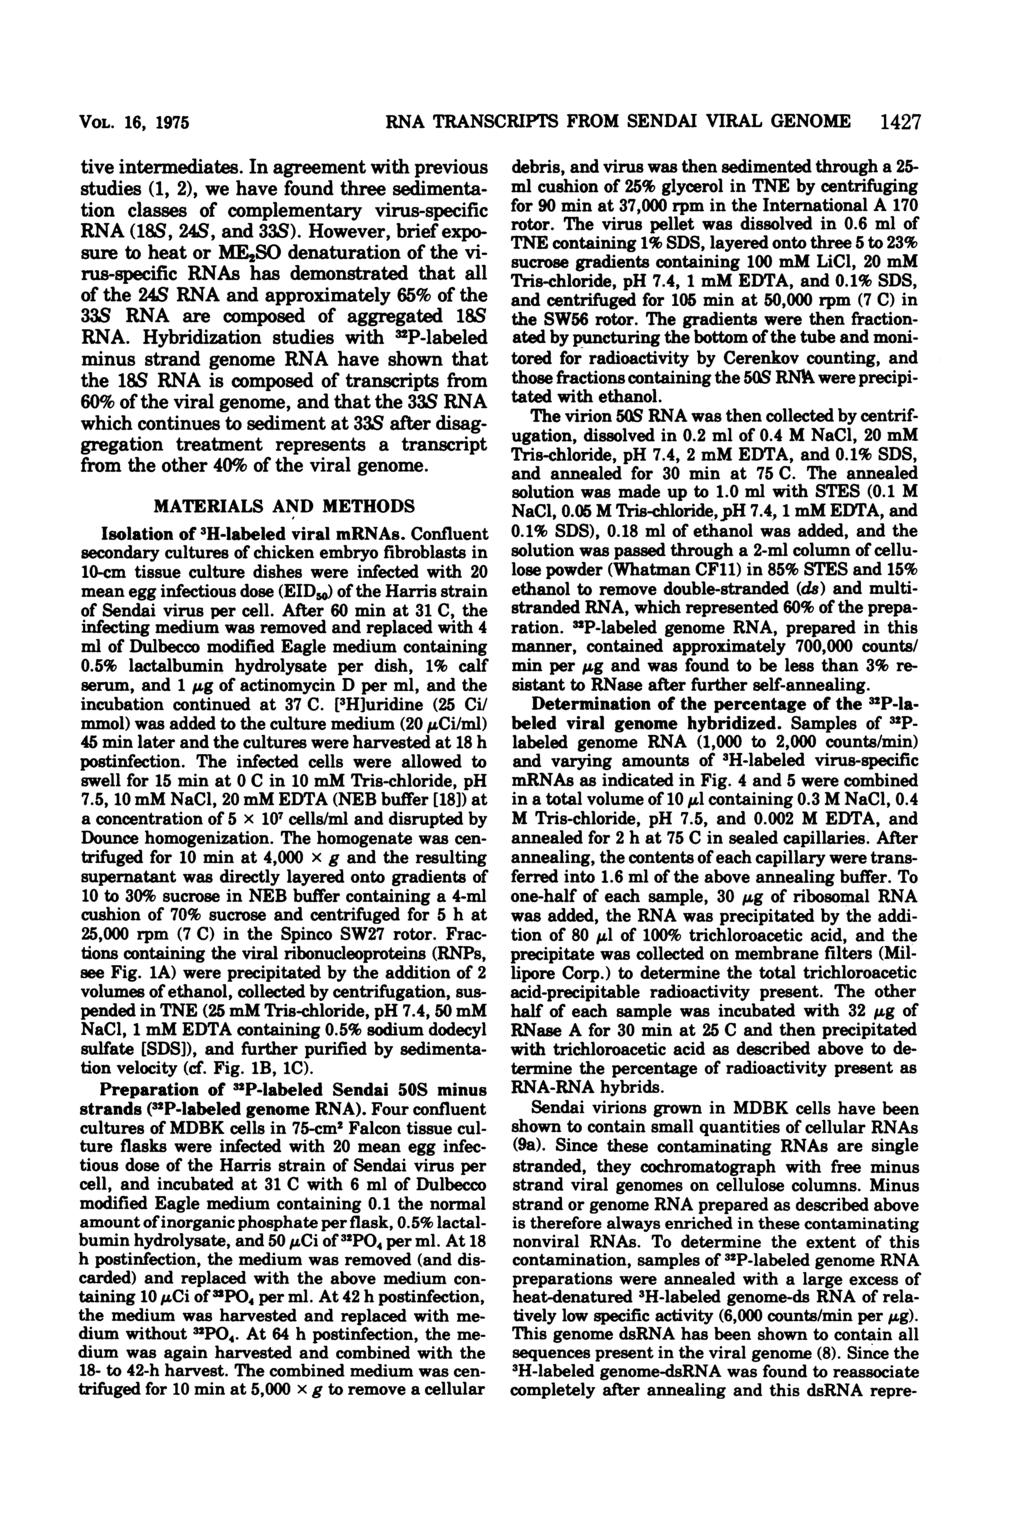 VOL. 16, 1975 tive intermediates. In agreement with previous studies (1, ), we have found three sedimentation classes of complementary virus-specific RNA (18S, 4S, and 33S).